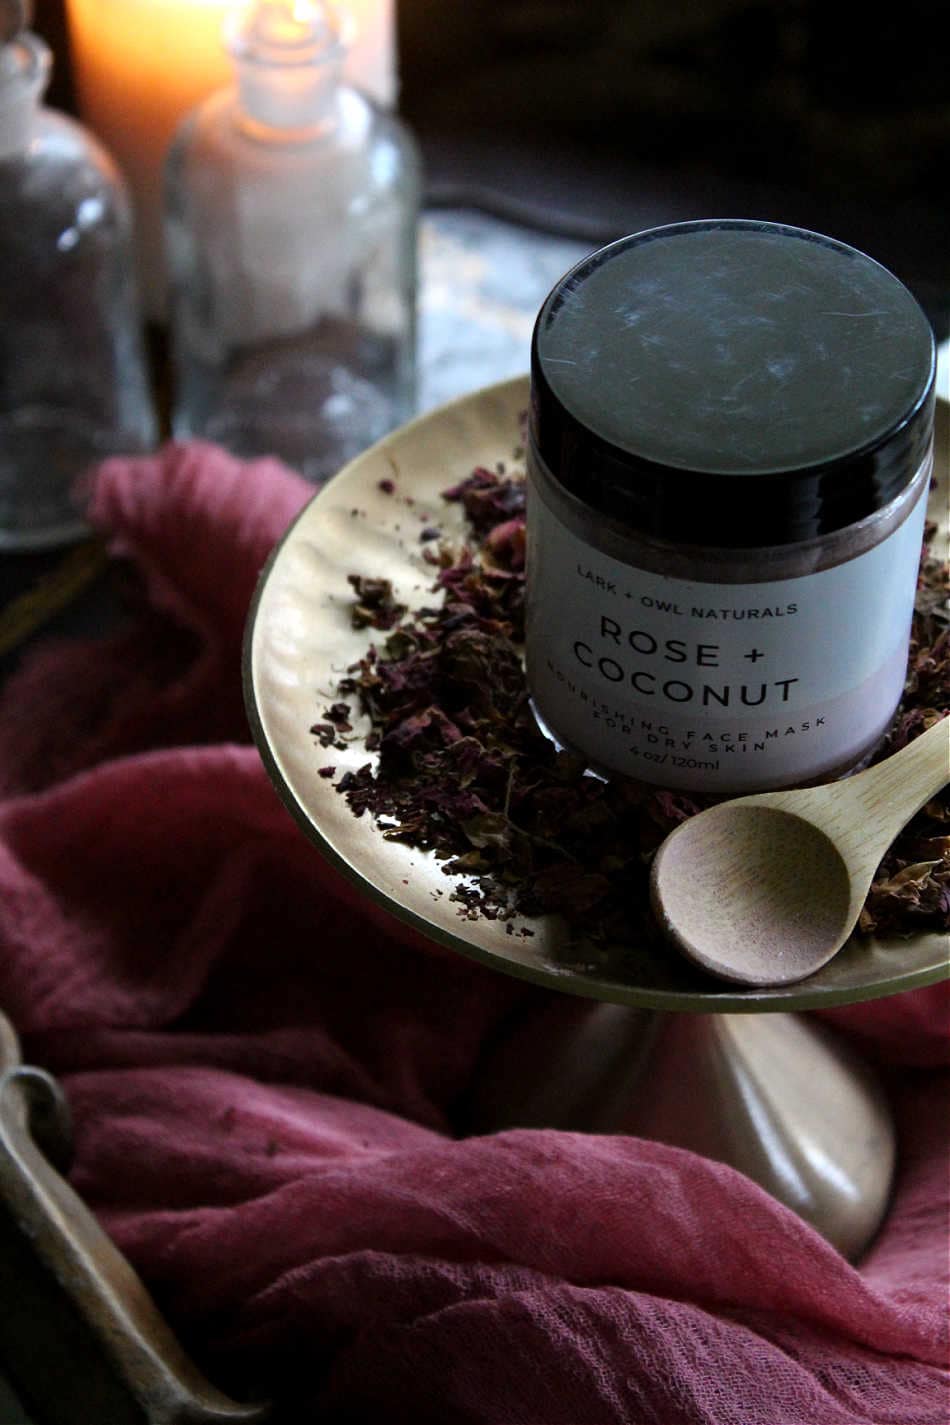 Lark & Owl Naturals Rose + Coconut Face Mask on gold plate with dried rose petals